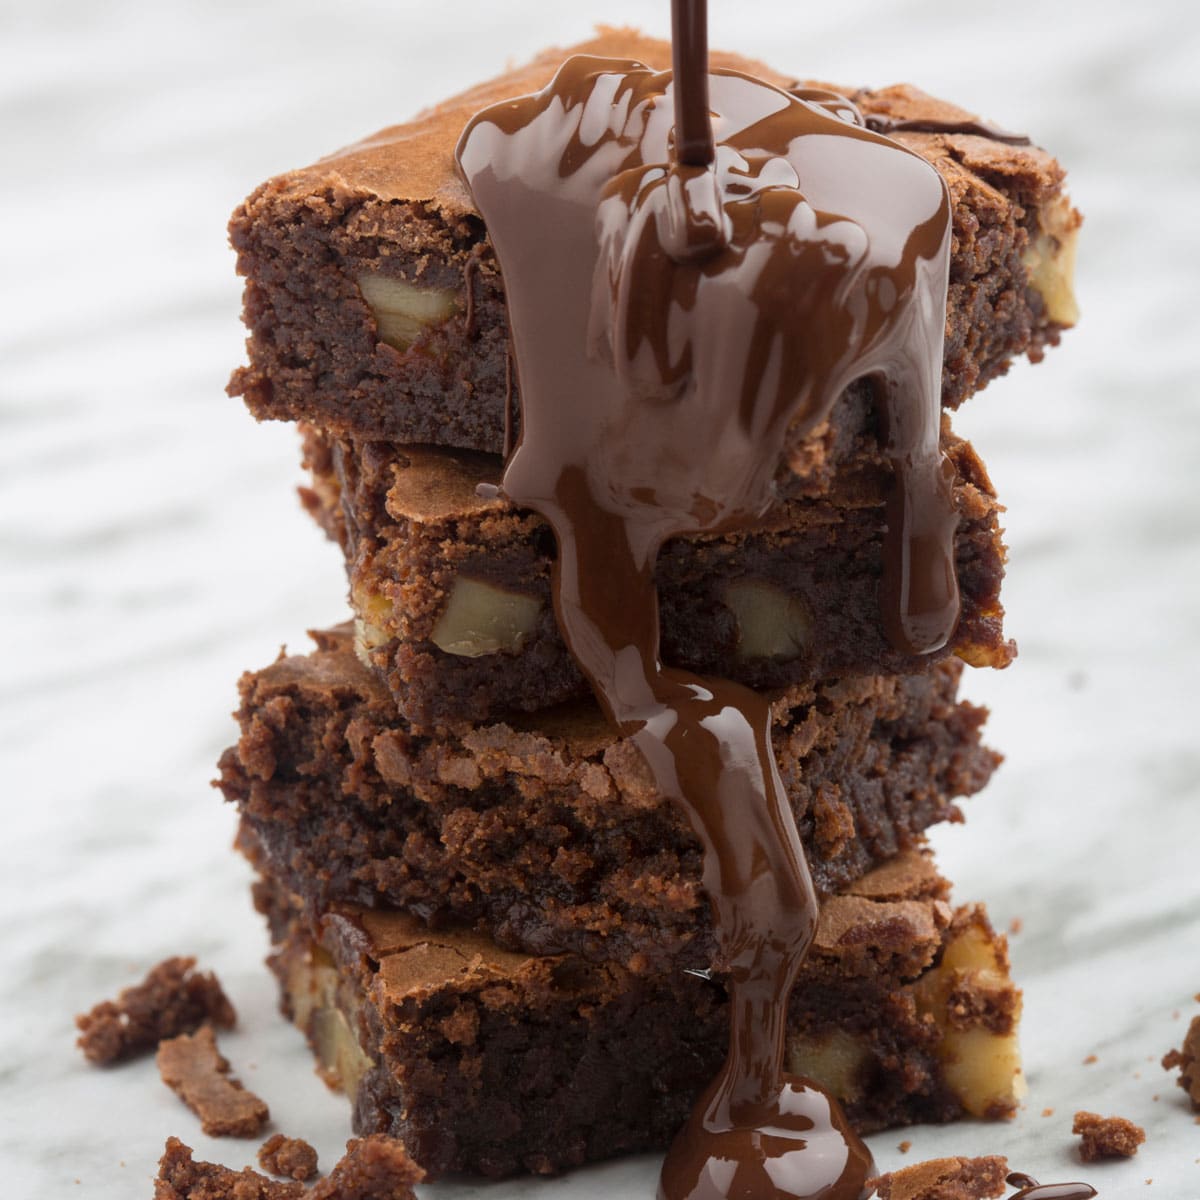 Savor every crumb! Transform leftover brownies into scrumptious delights with our innovative ideas that'll delight your taste buds.